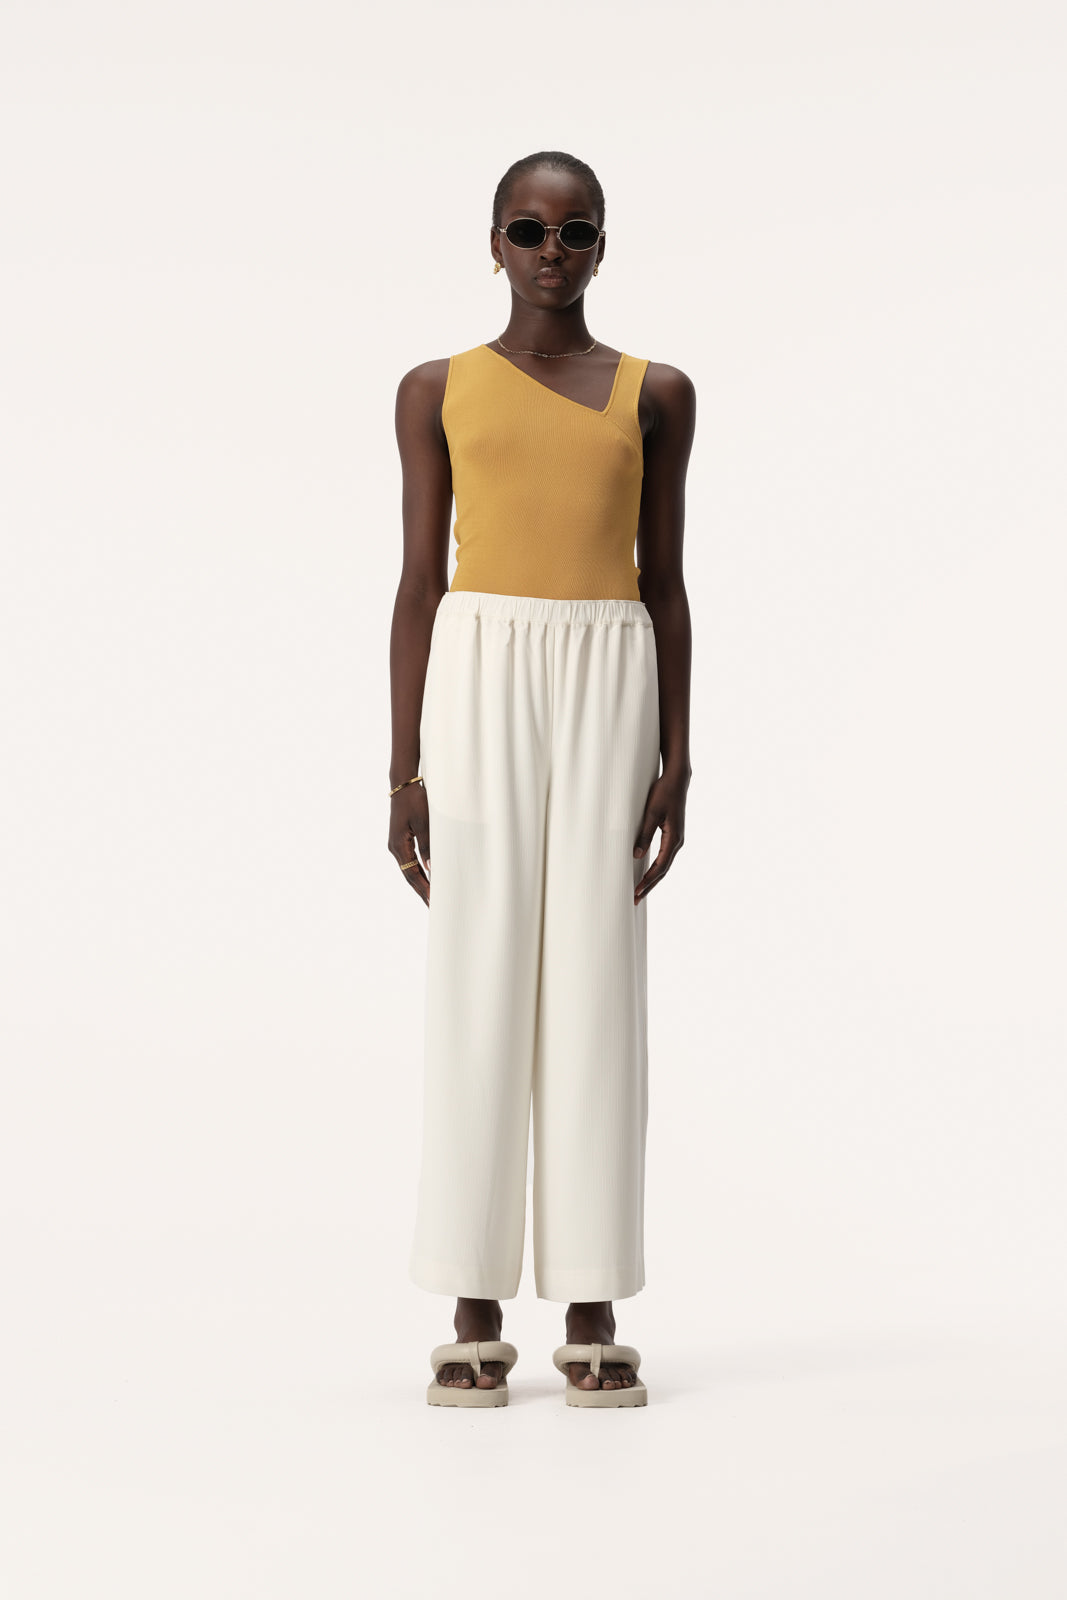 Roth Sleeveless Knit Top with Asymmetric Neck in Marigold | Elka Collective